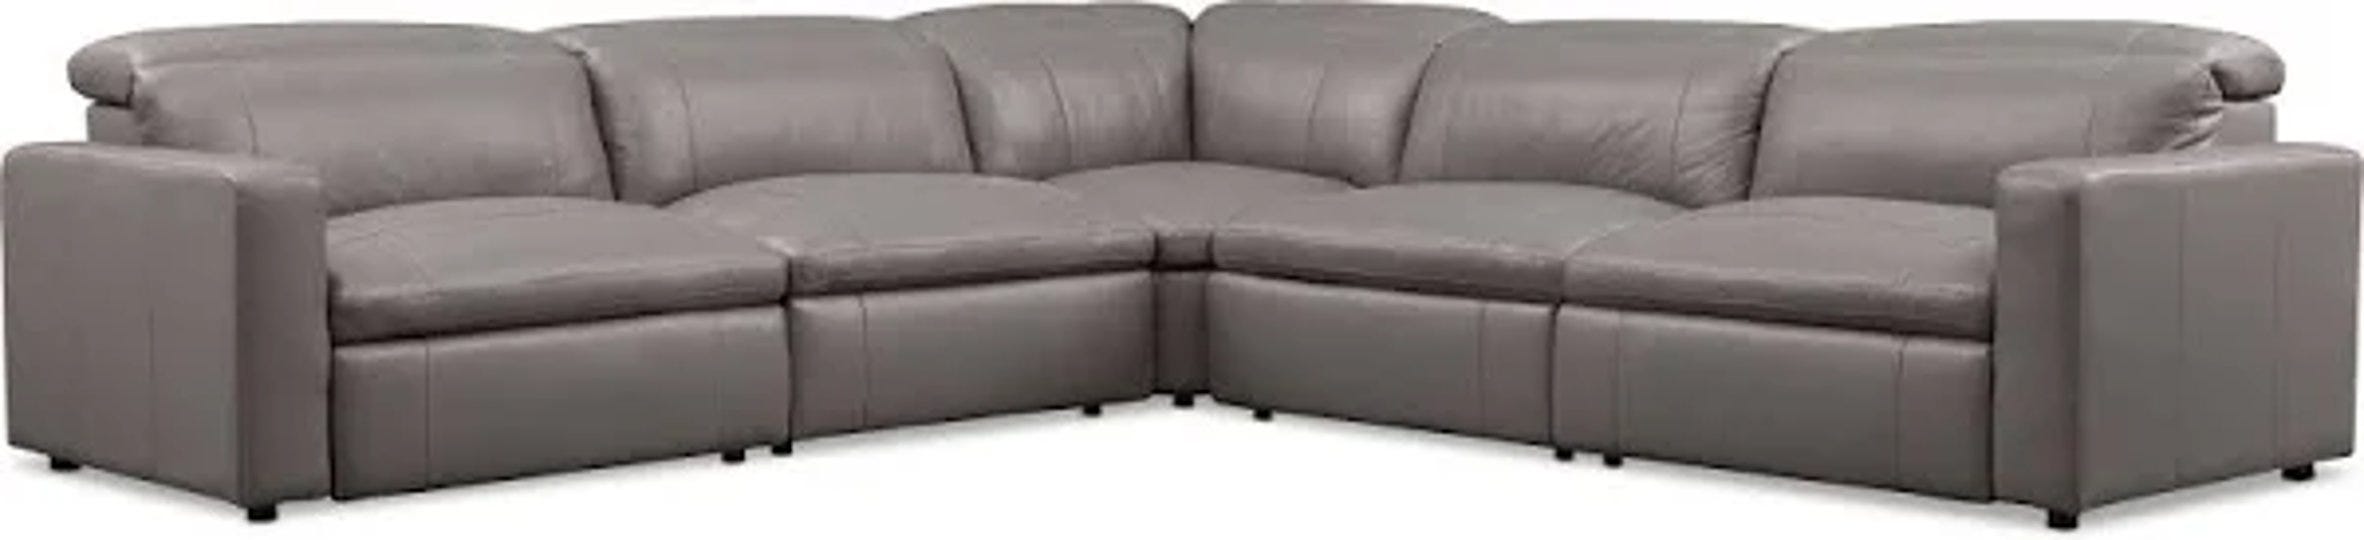 happy-5-piece-dual-power-reclining-sectional-with-3-reclining-seats-gray-1